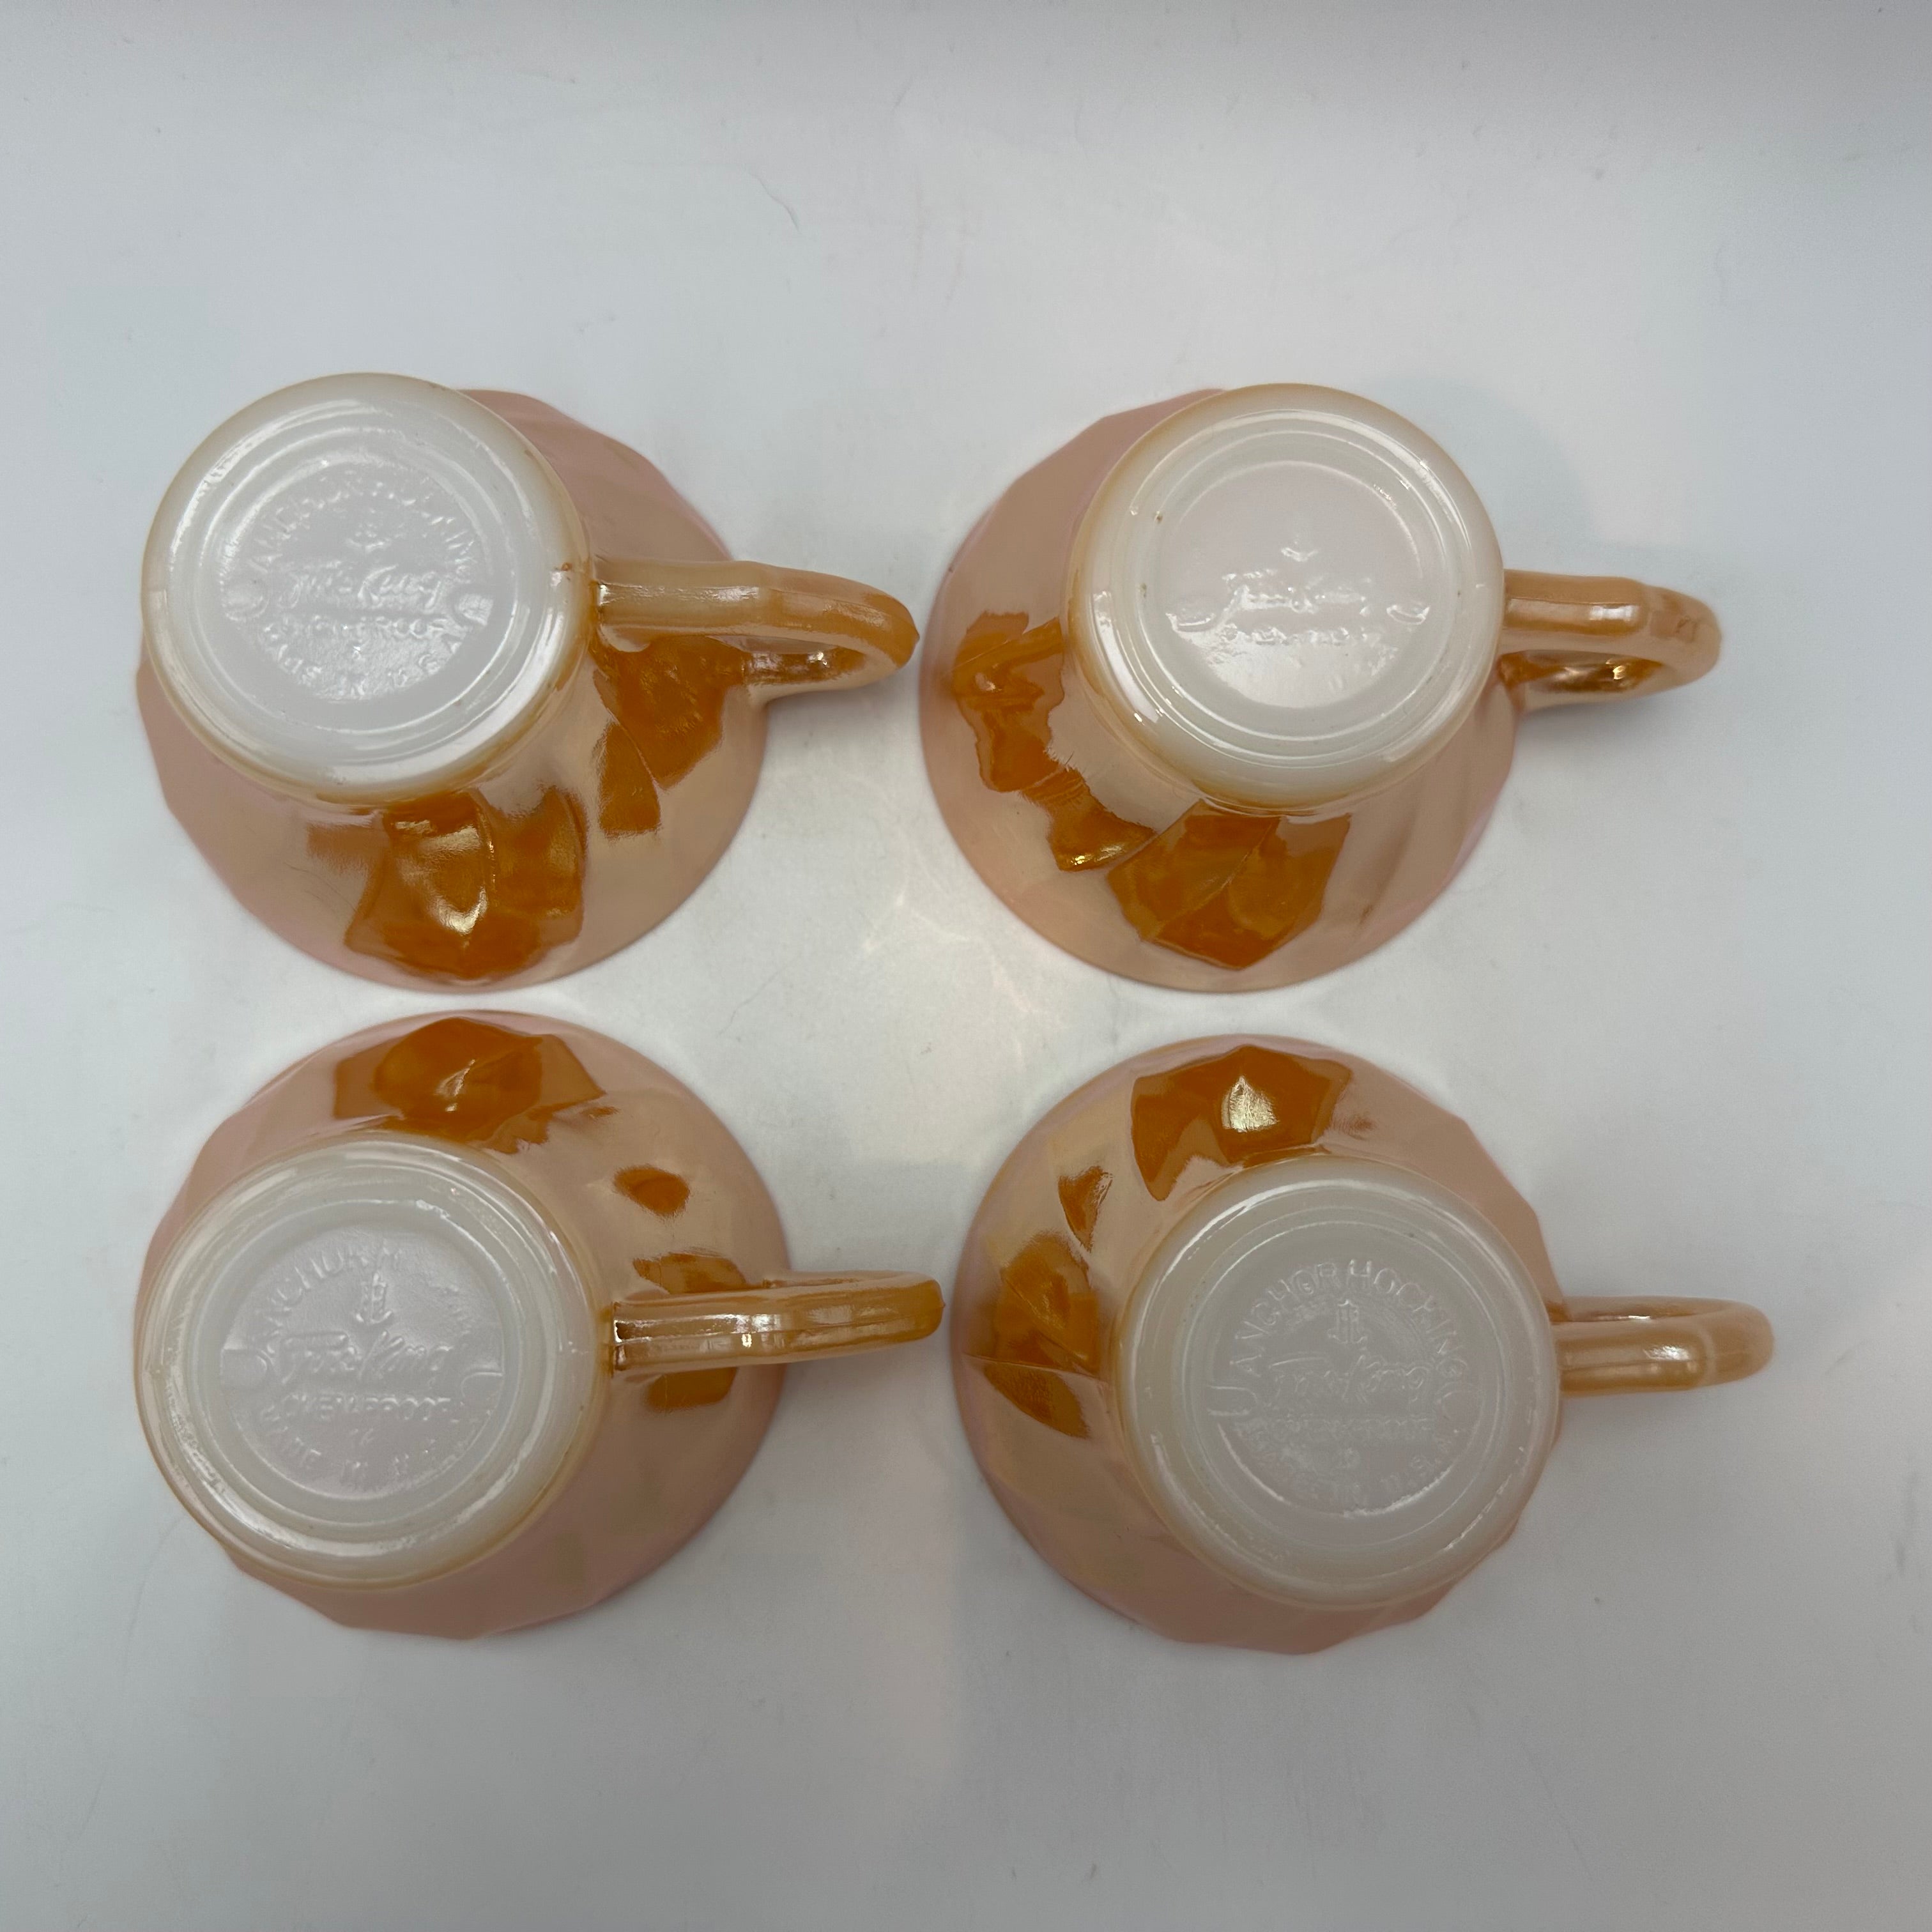 Anchor Hocking Oven Ware Peach Luster Swirl Demitasse Cups and Saucers, Set of 4